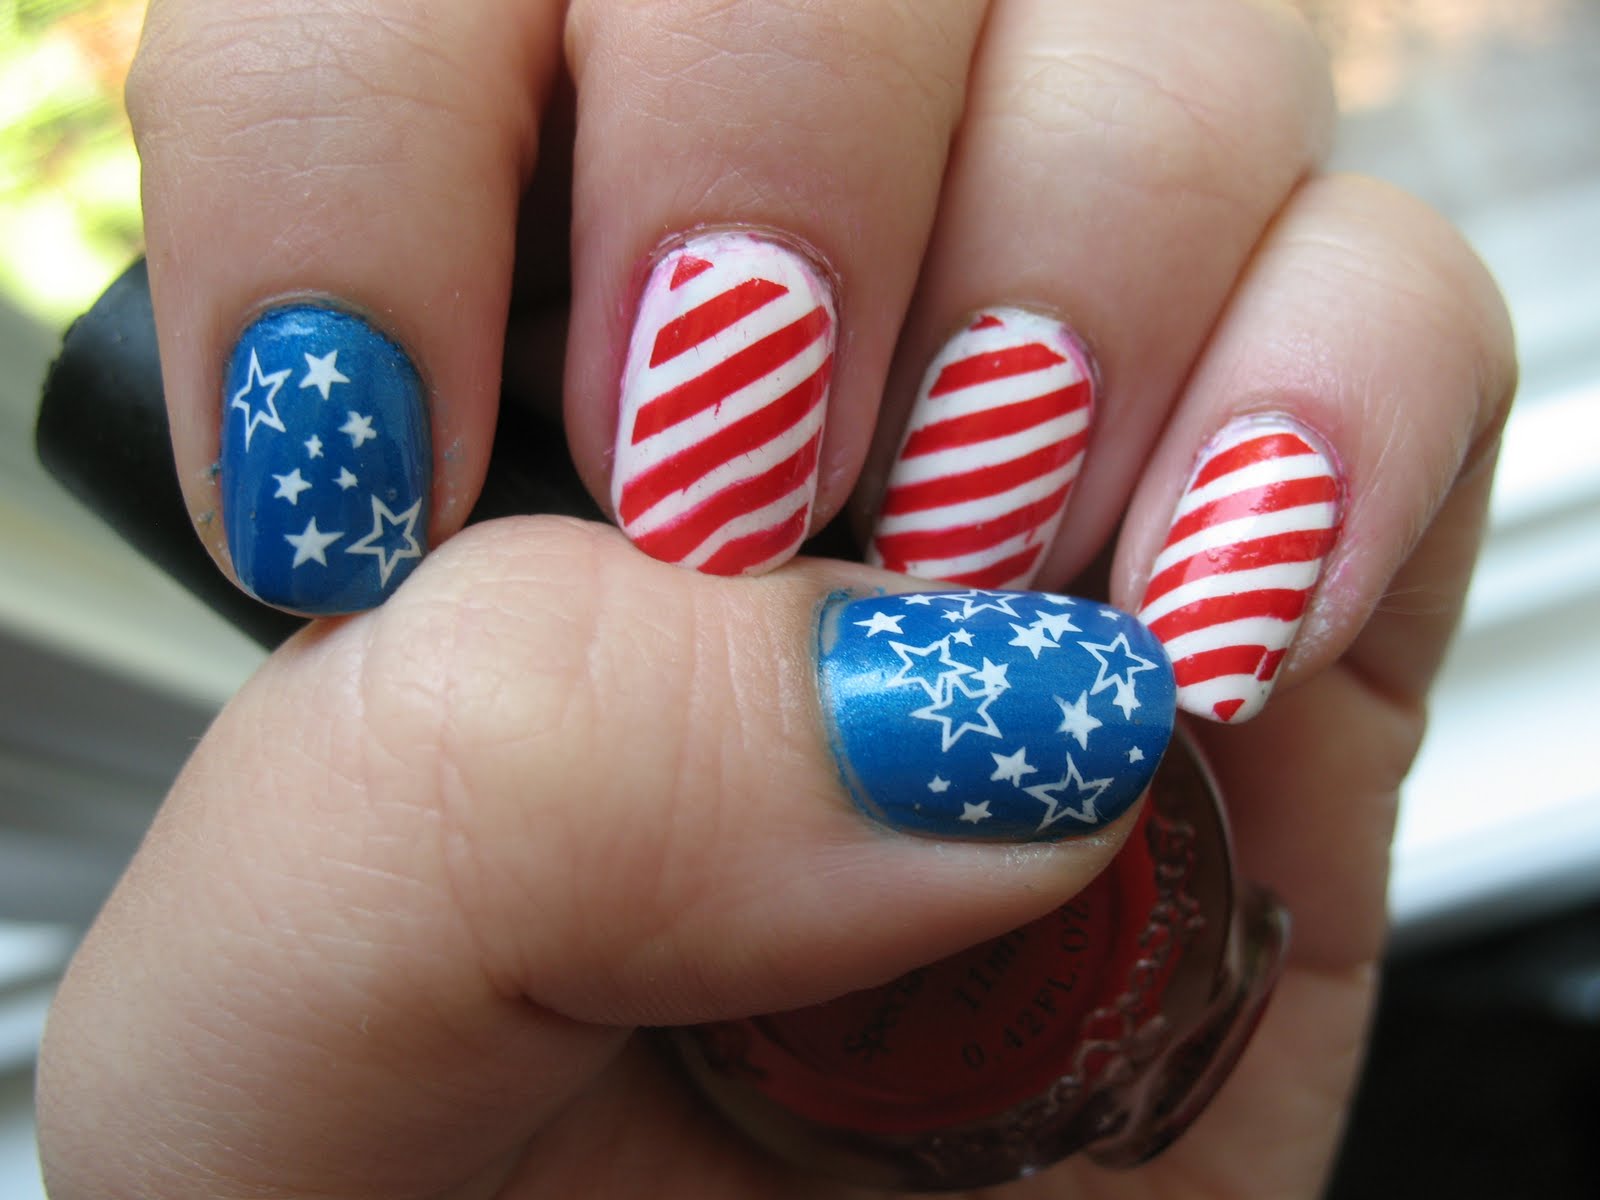 1. Patriotic Nail Art Designs for National Day - wide 4